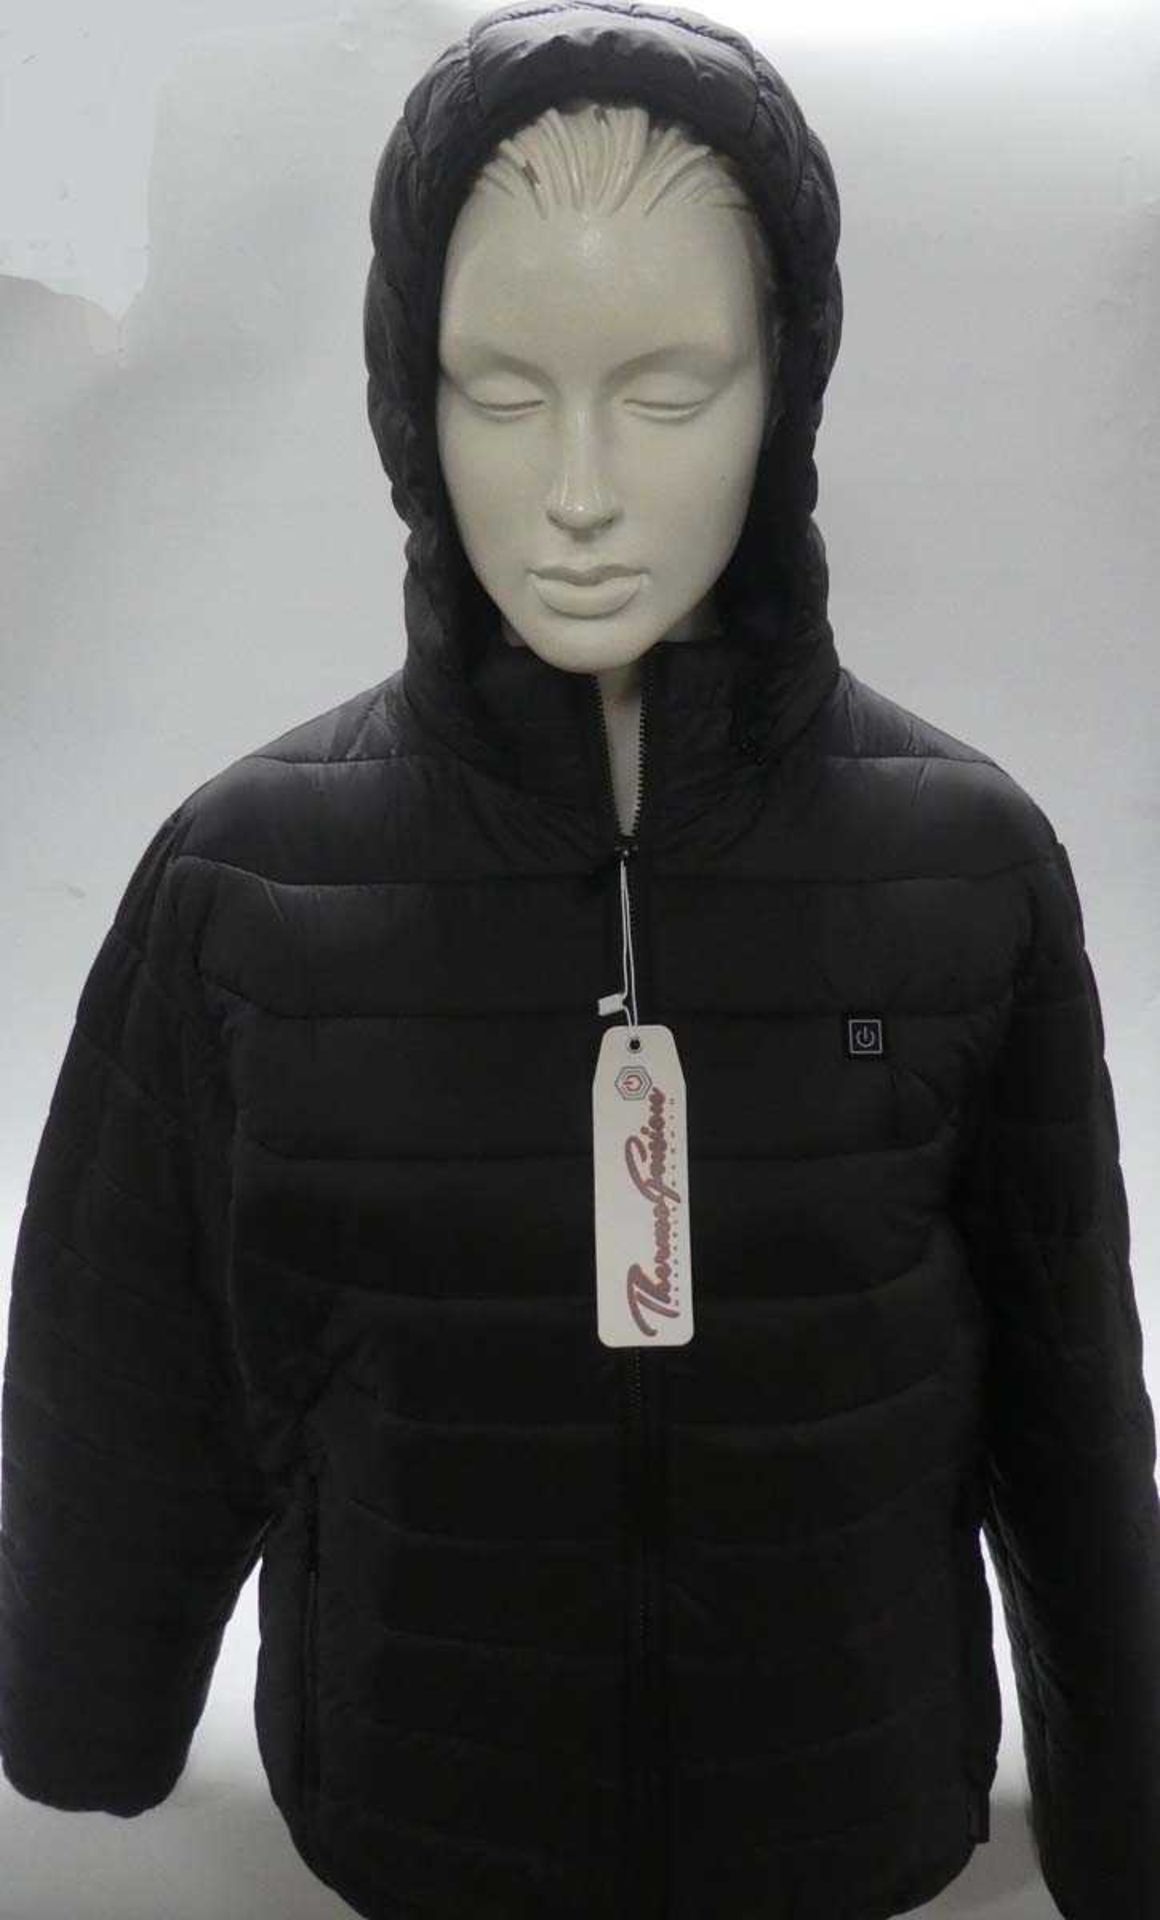 +VAT Thermofusion heated parka with 5000mAh battery pack size large